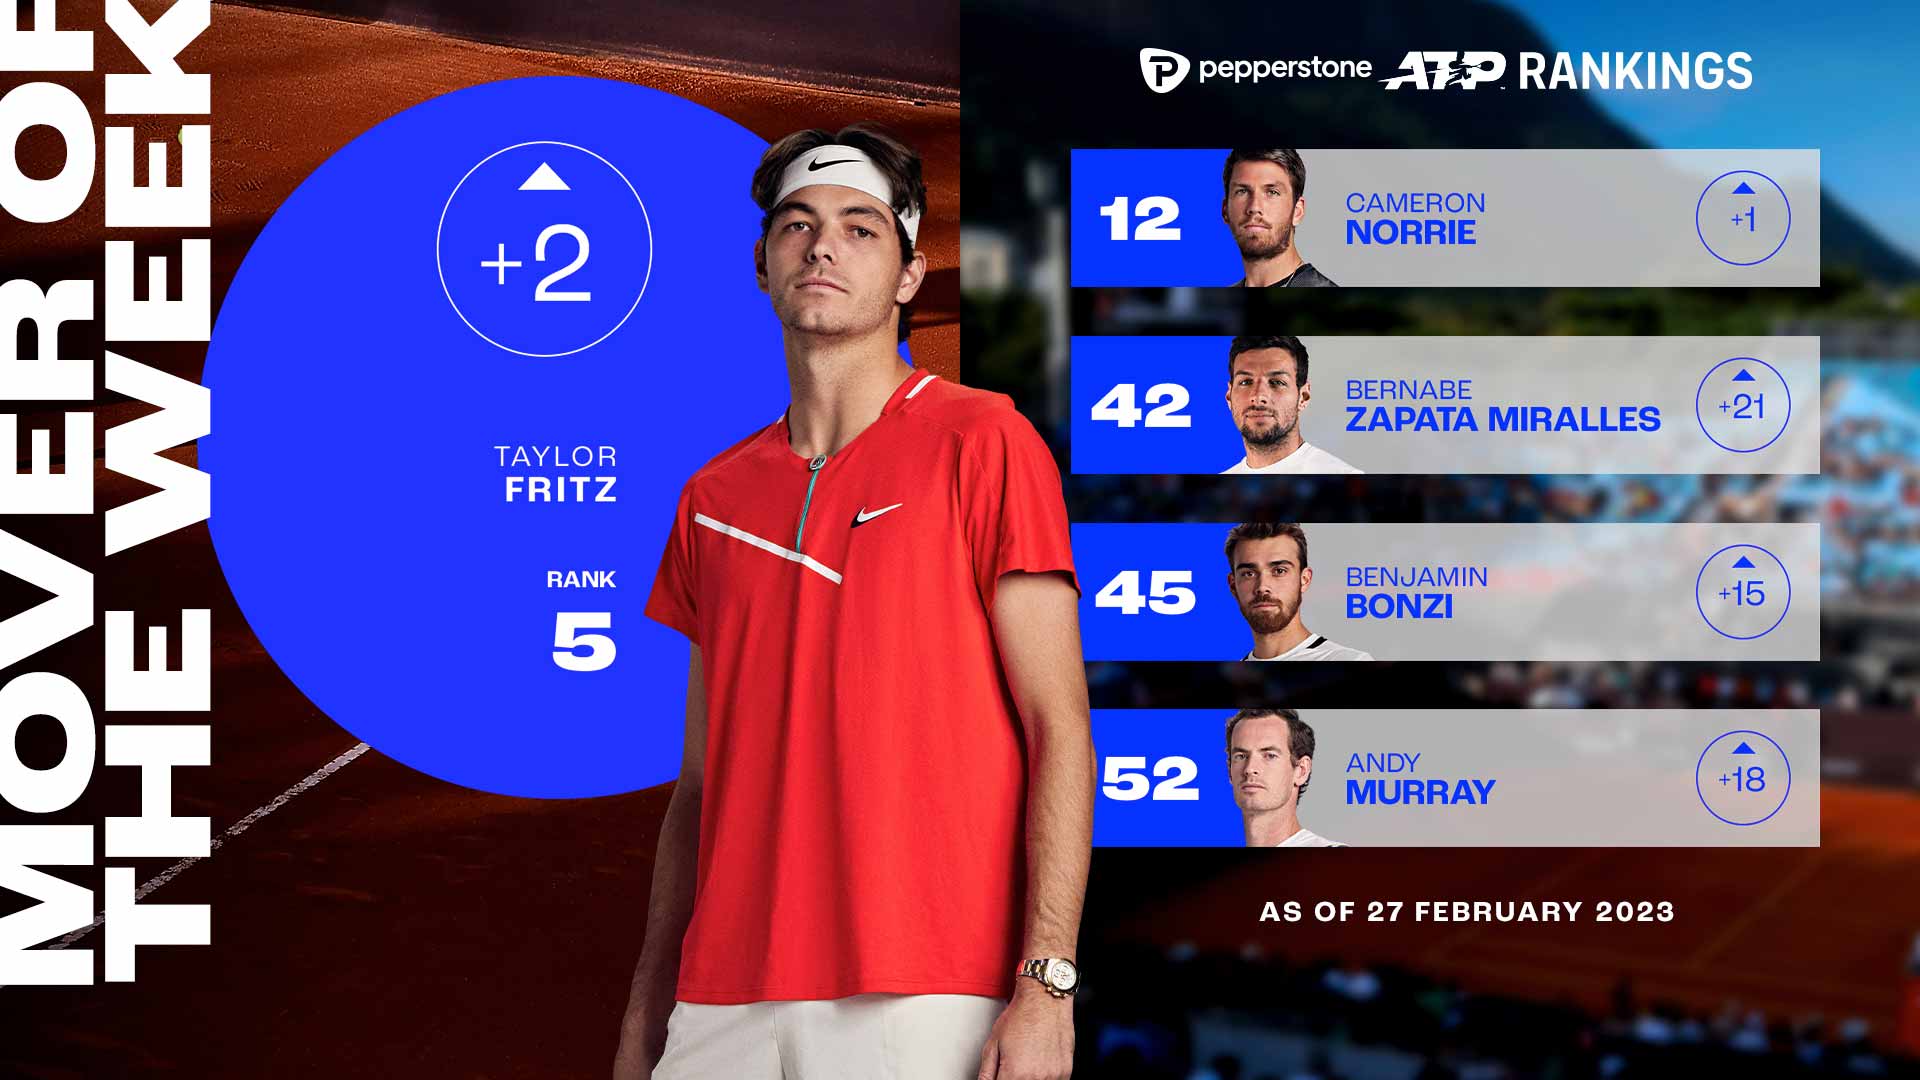 Taylor Fritz is the first American to be ranked inside the Top 5 since Andy Roddick in September 2009.